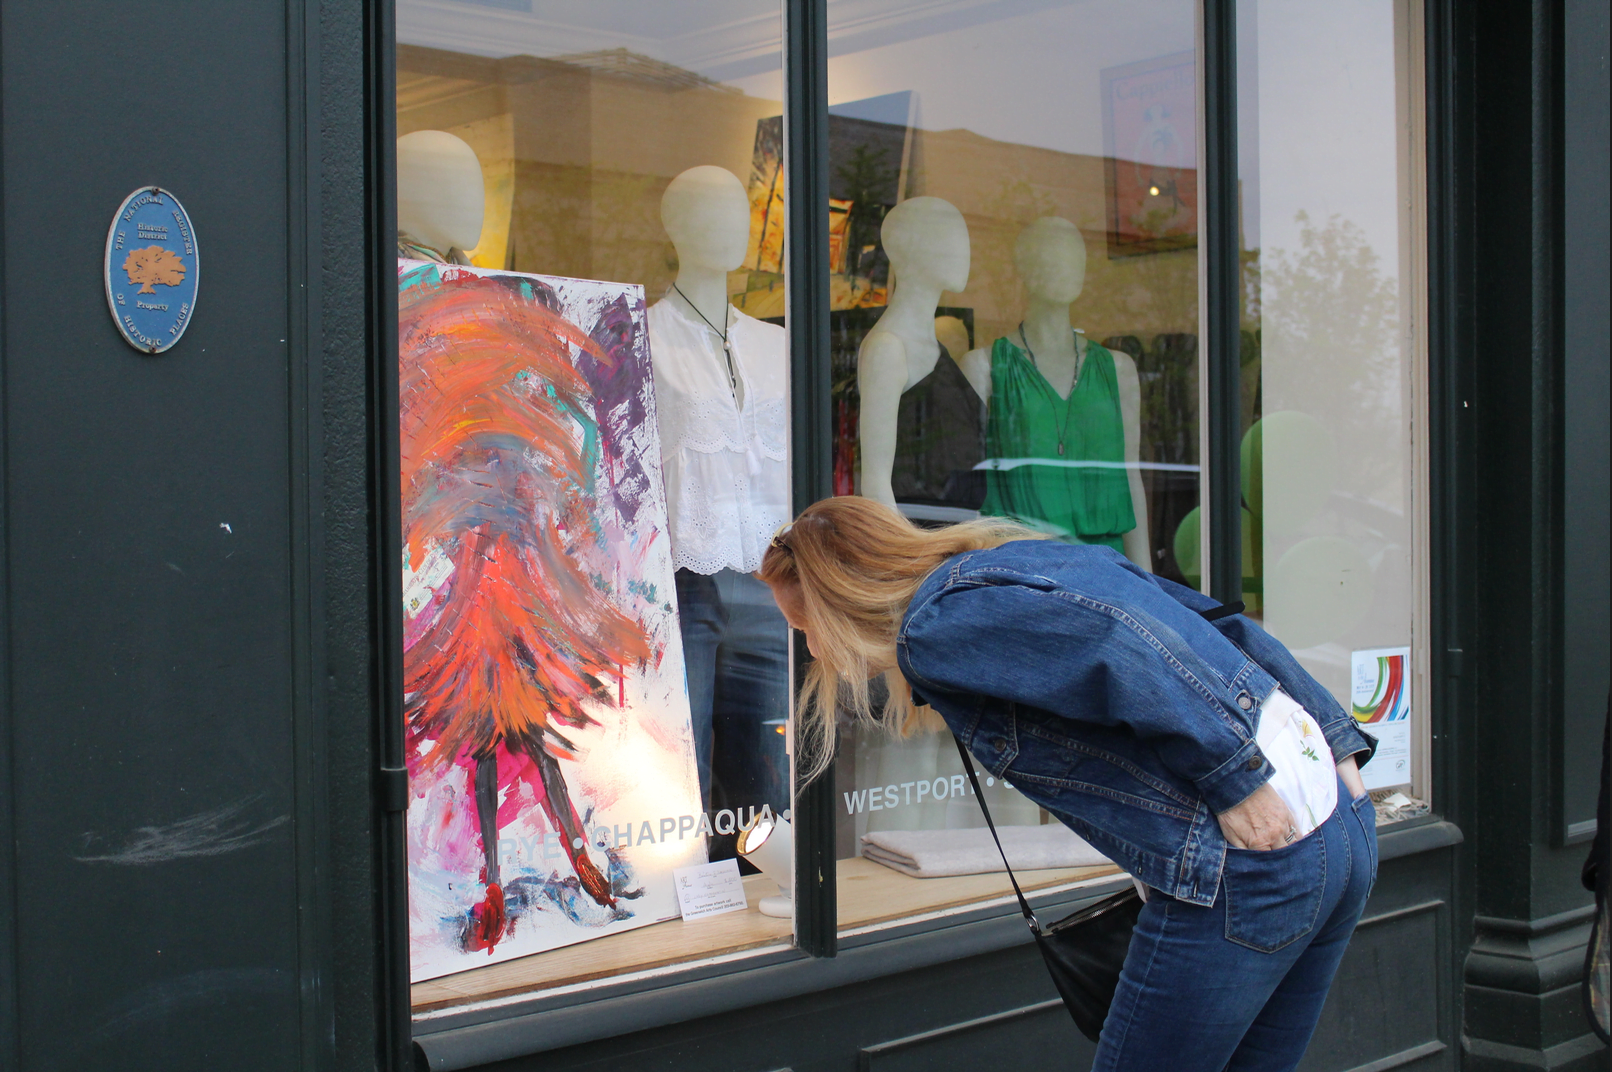 A passerby admires the artwork of Beatrice J Drouhin. May 4, 2017 Photo: Leslie Yager